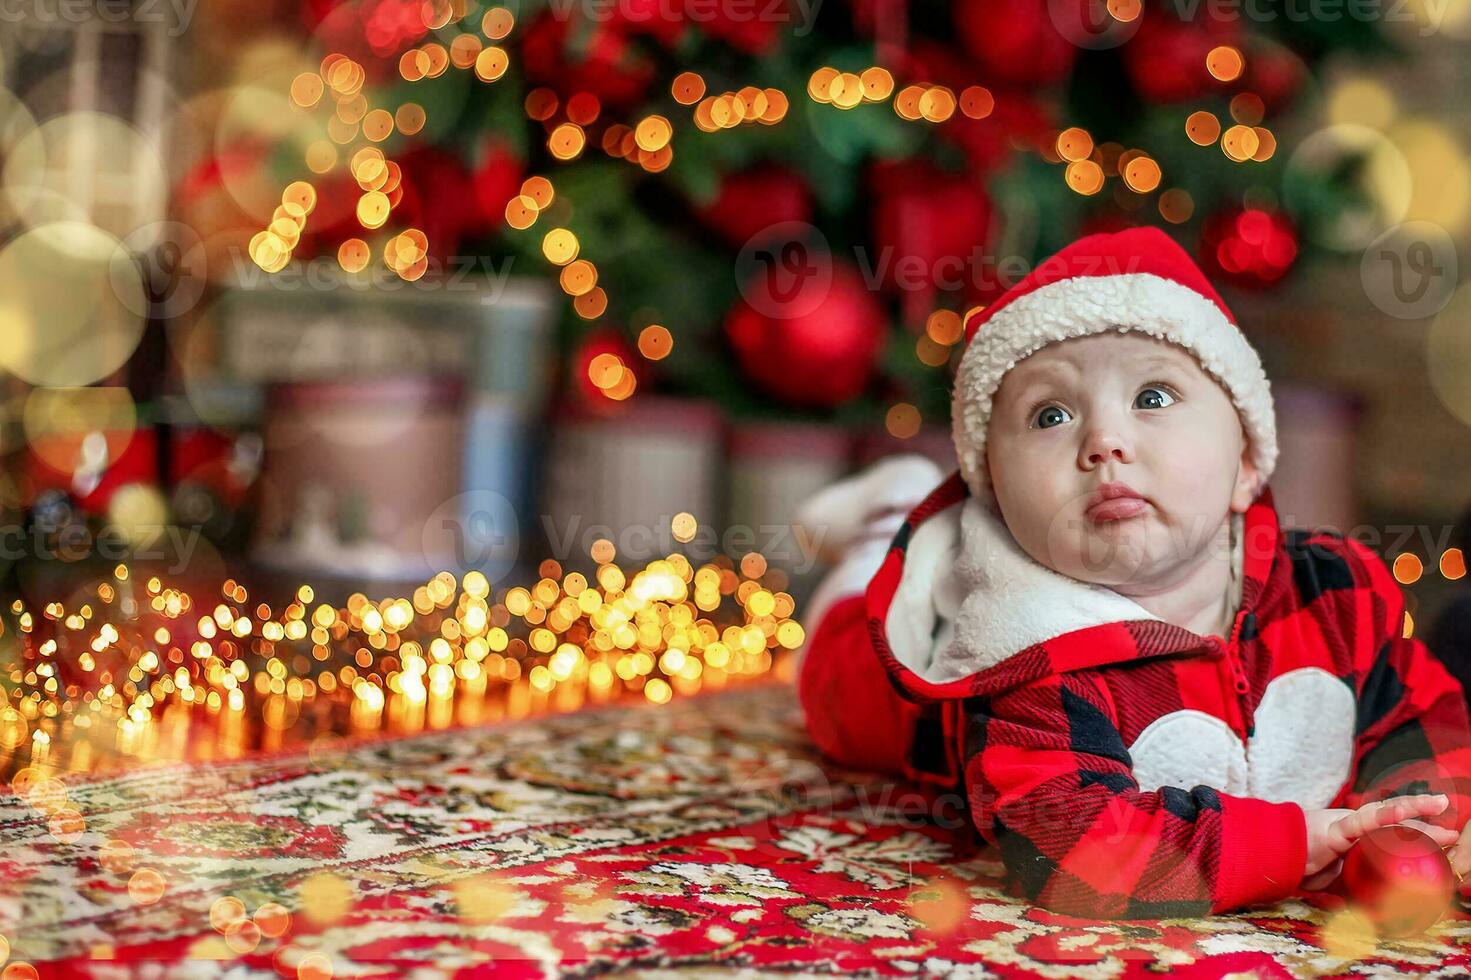 Little six month old baby dressed as Santa Claus. Background for christmas card. The child looks up at the place for inscription. photo